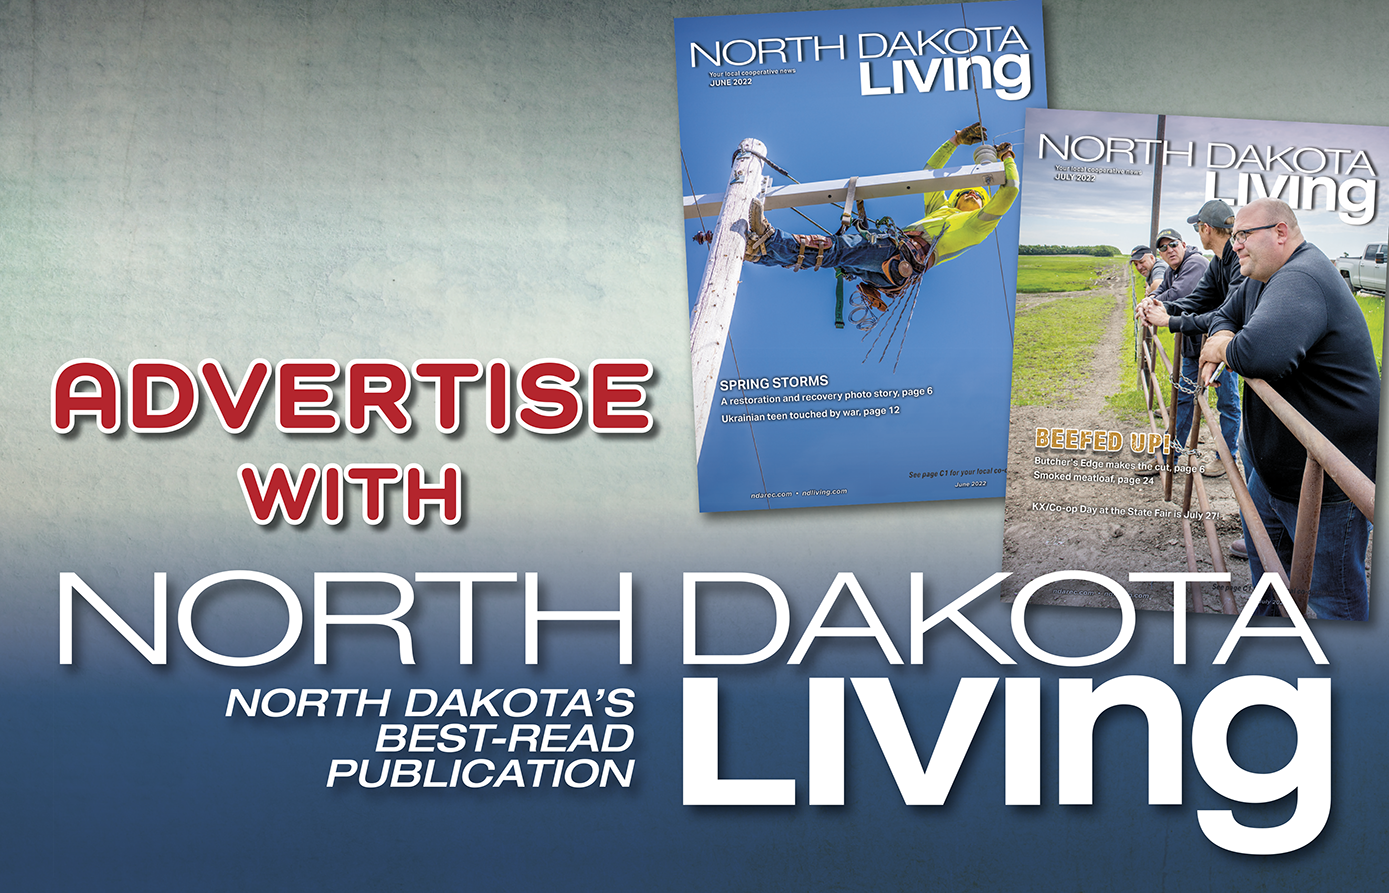 Advertise with NDLiving